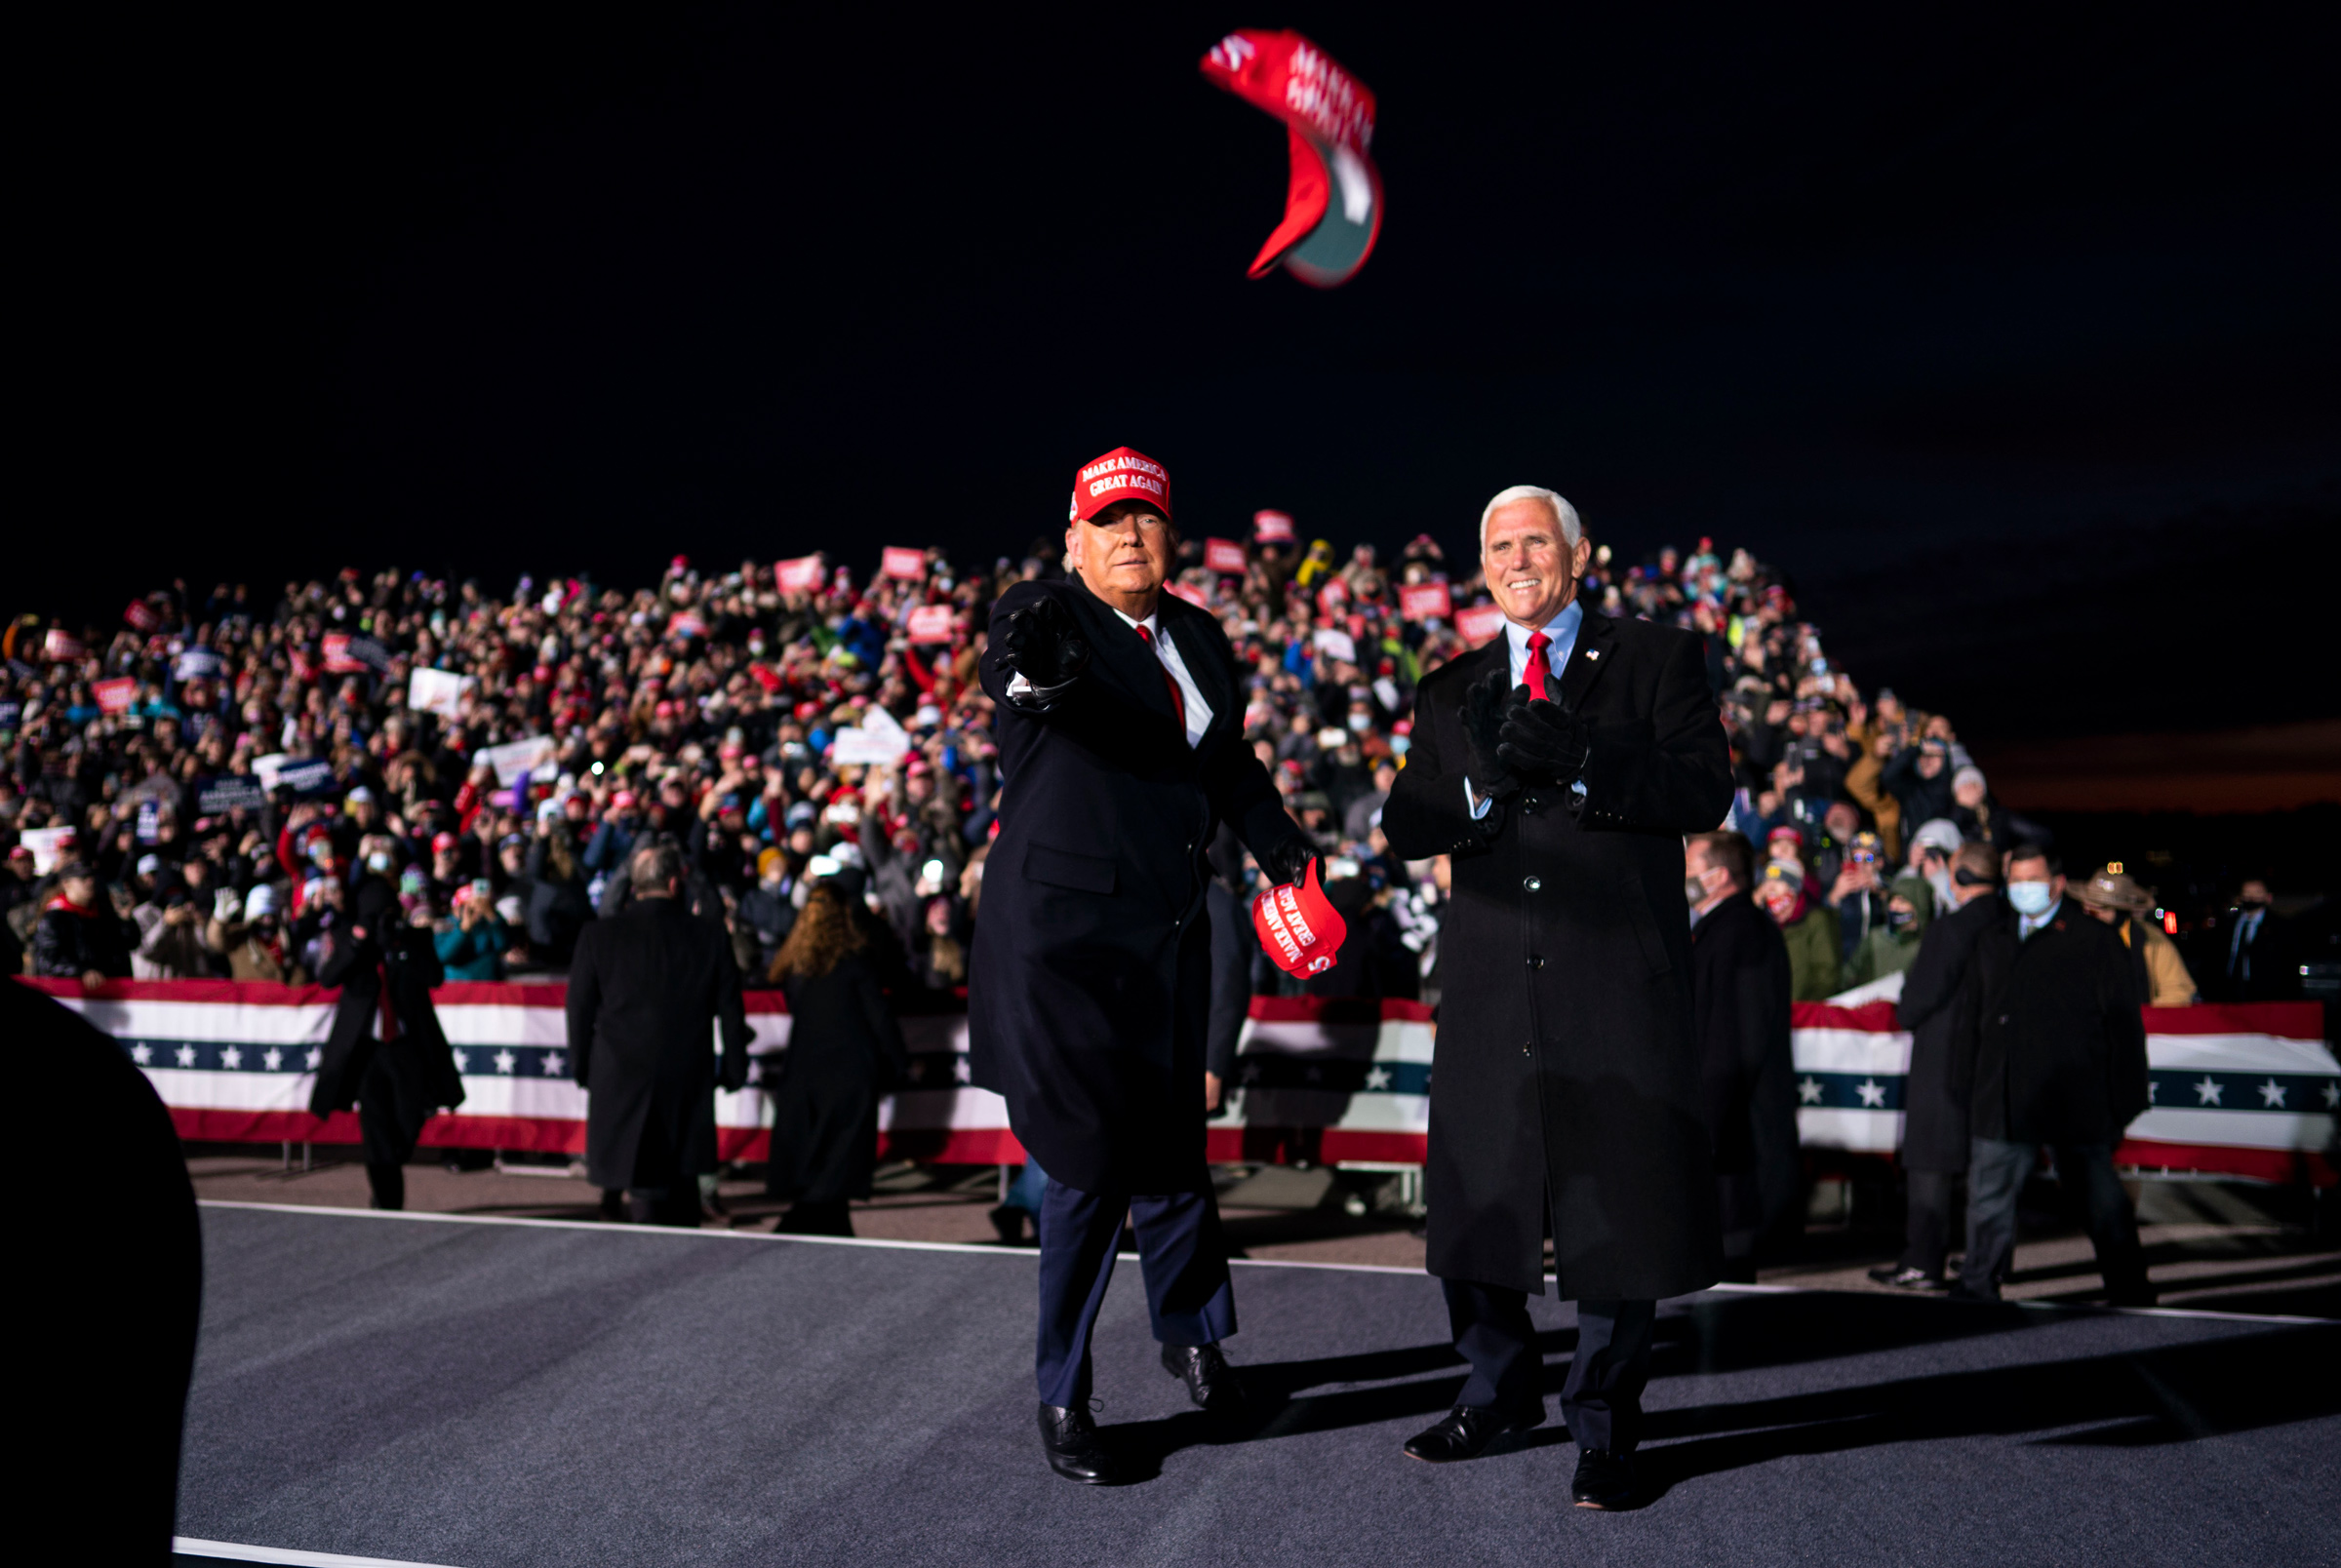 President Donald Trump tosses campaign hats to the audience during a campaign rally with Vice President Mike Pence at  Cherry Capital Airport in Traverse City, Mich., Monday, Nov, 2, 2020. (Doug Mills/The New York Times)